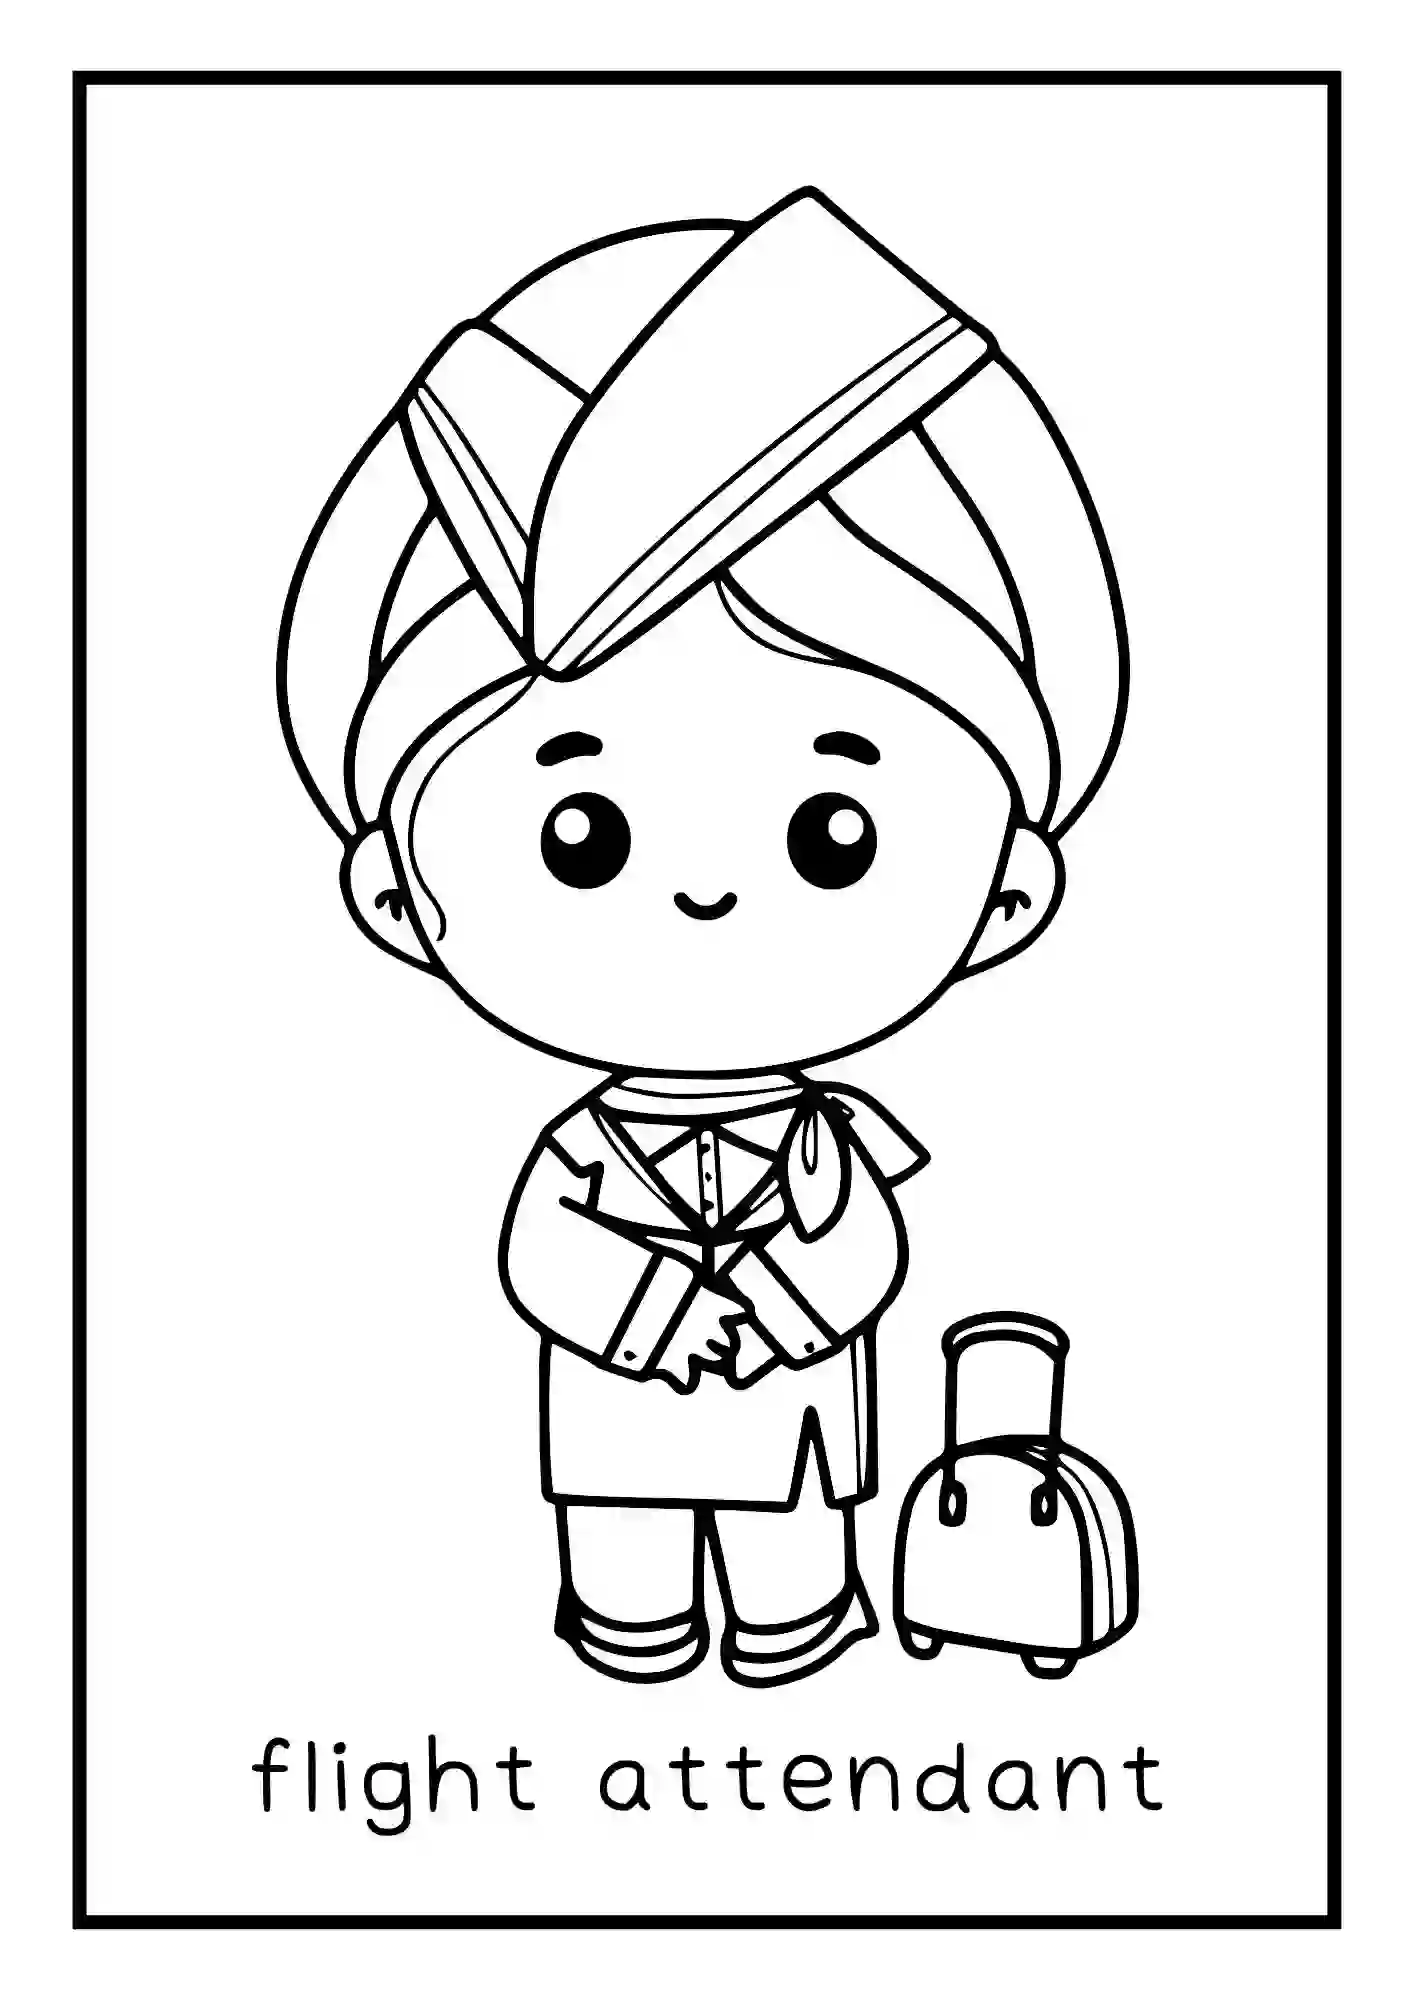 Different Professions, occupations, carriers, jobs, Coloring Worksheets (flight attendant)